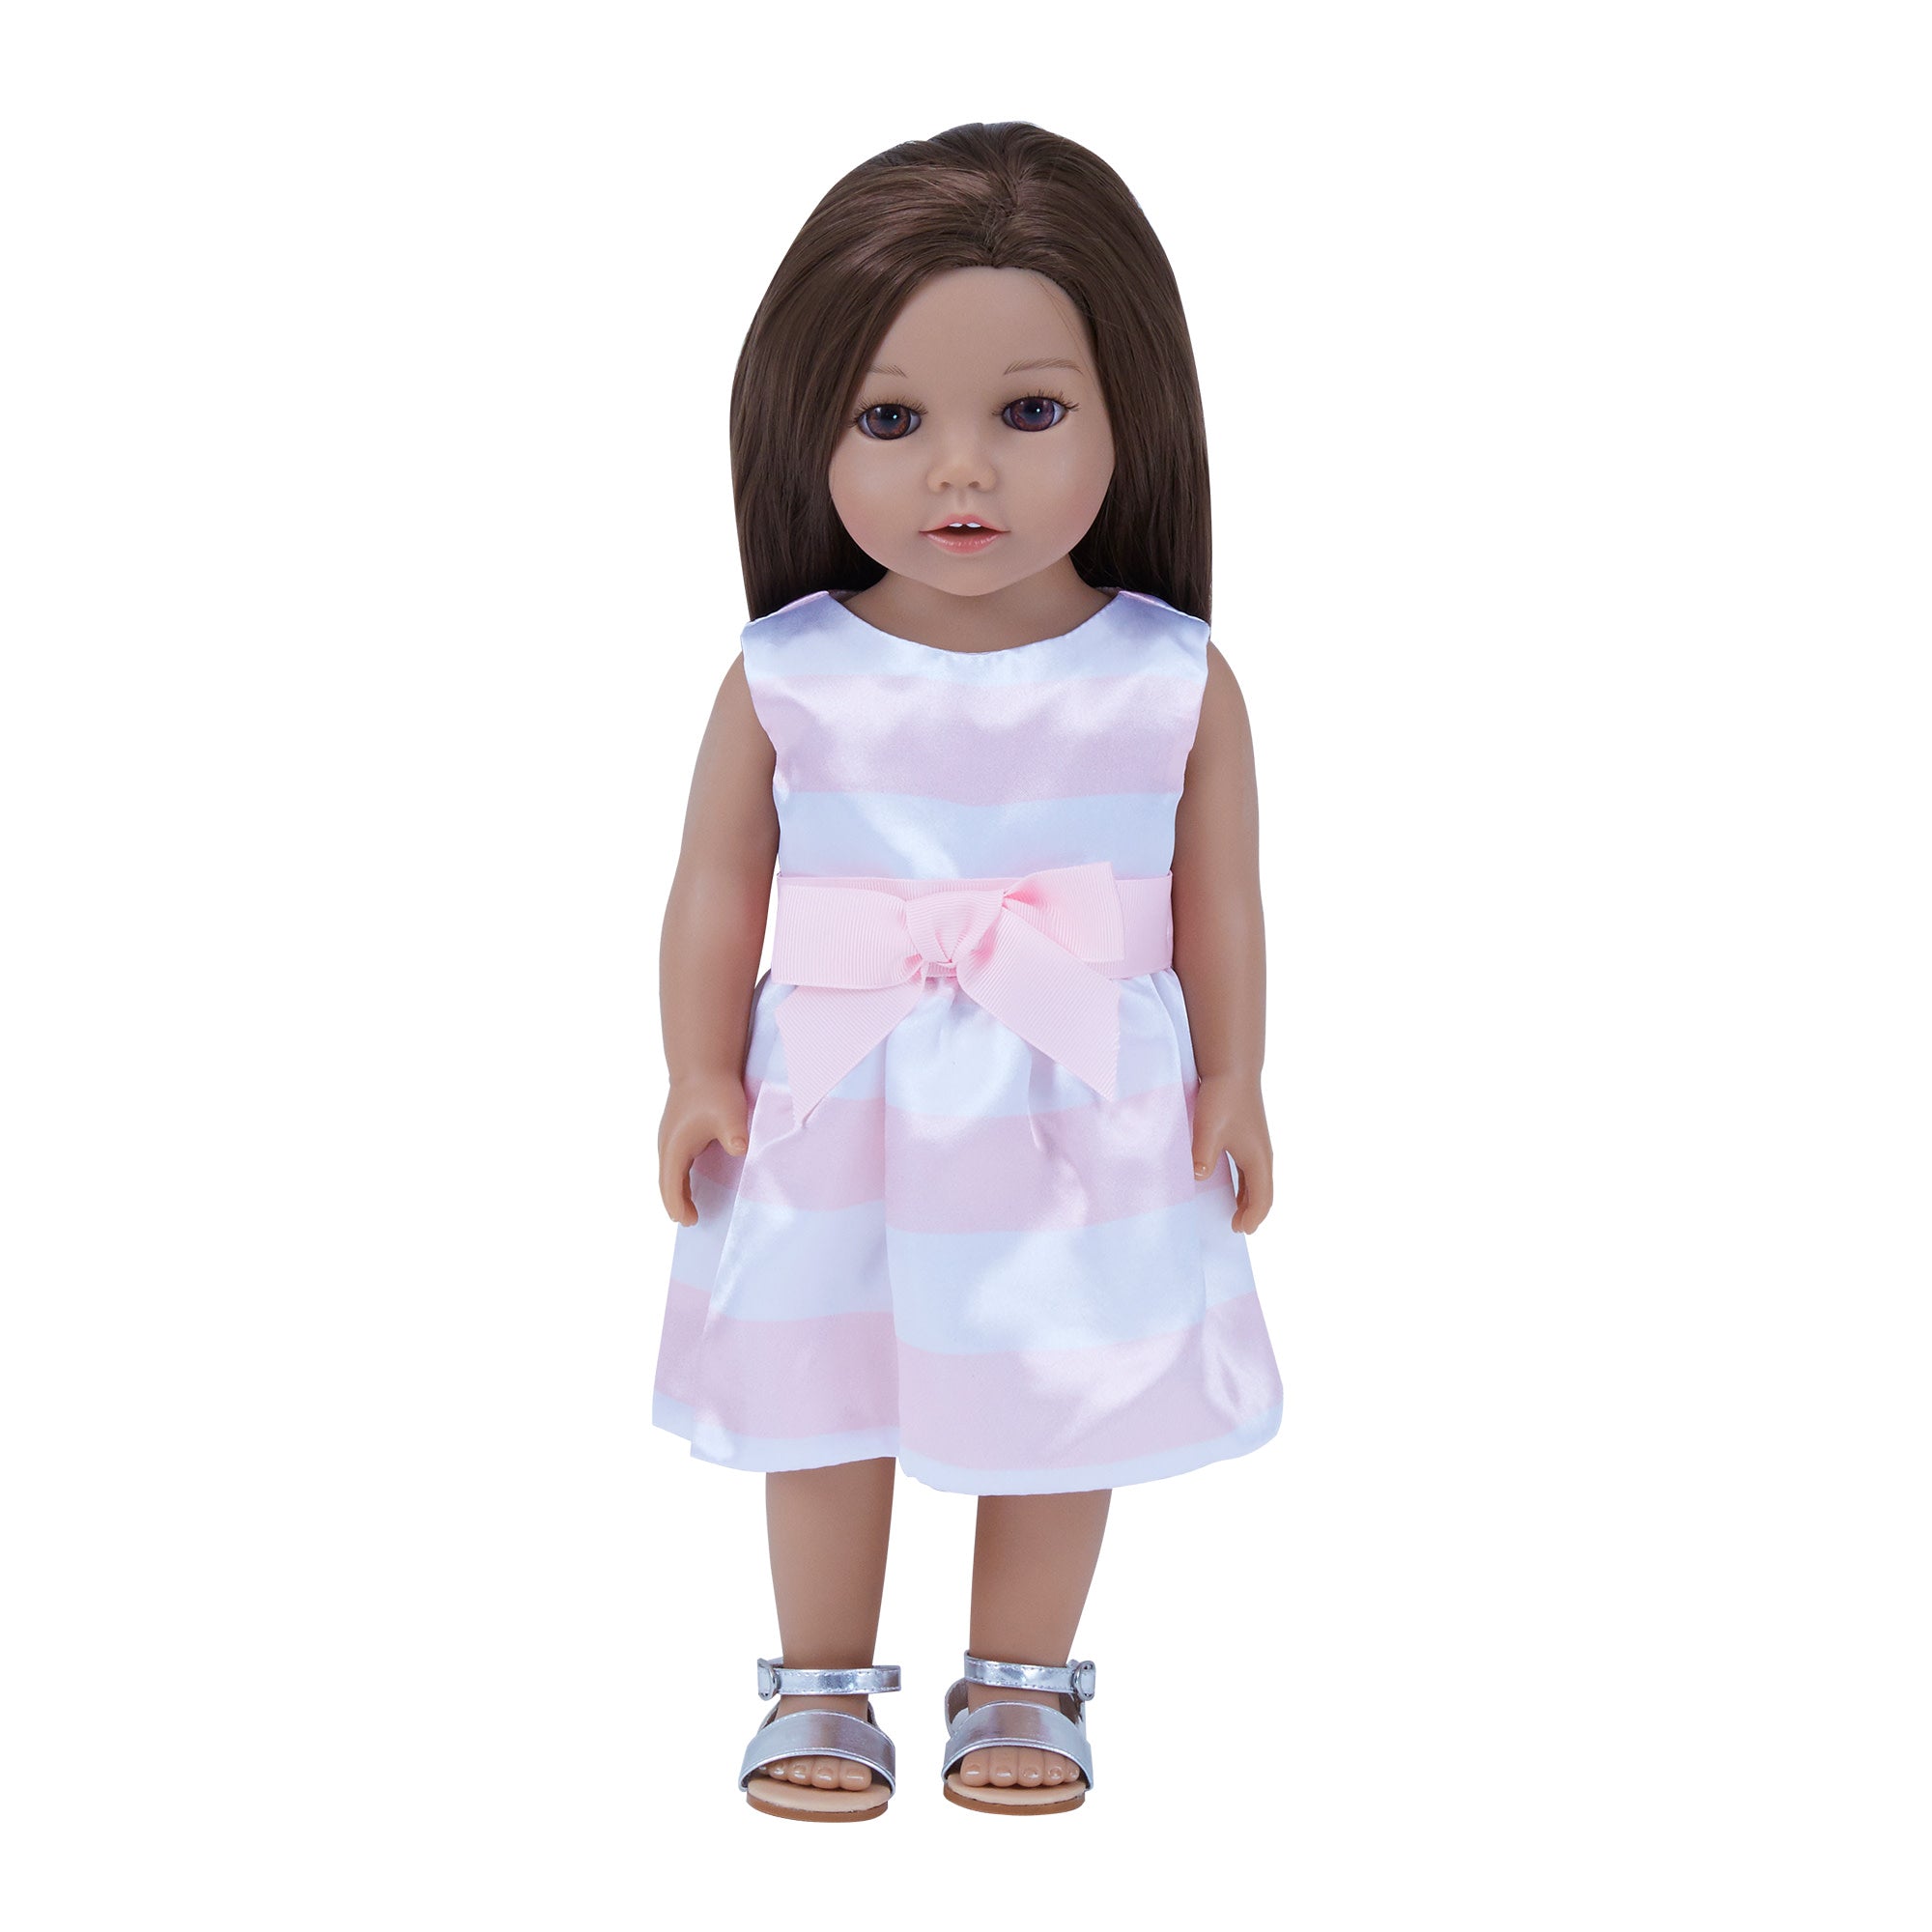 Sophia's Stripe Satin Party Dress and Ankle Strap Sandals for 18" Dolls, Pink/White